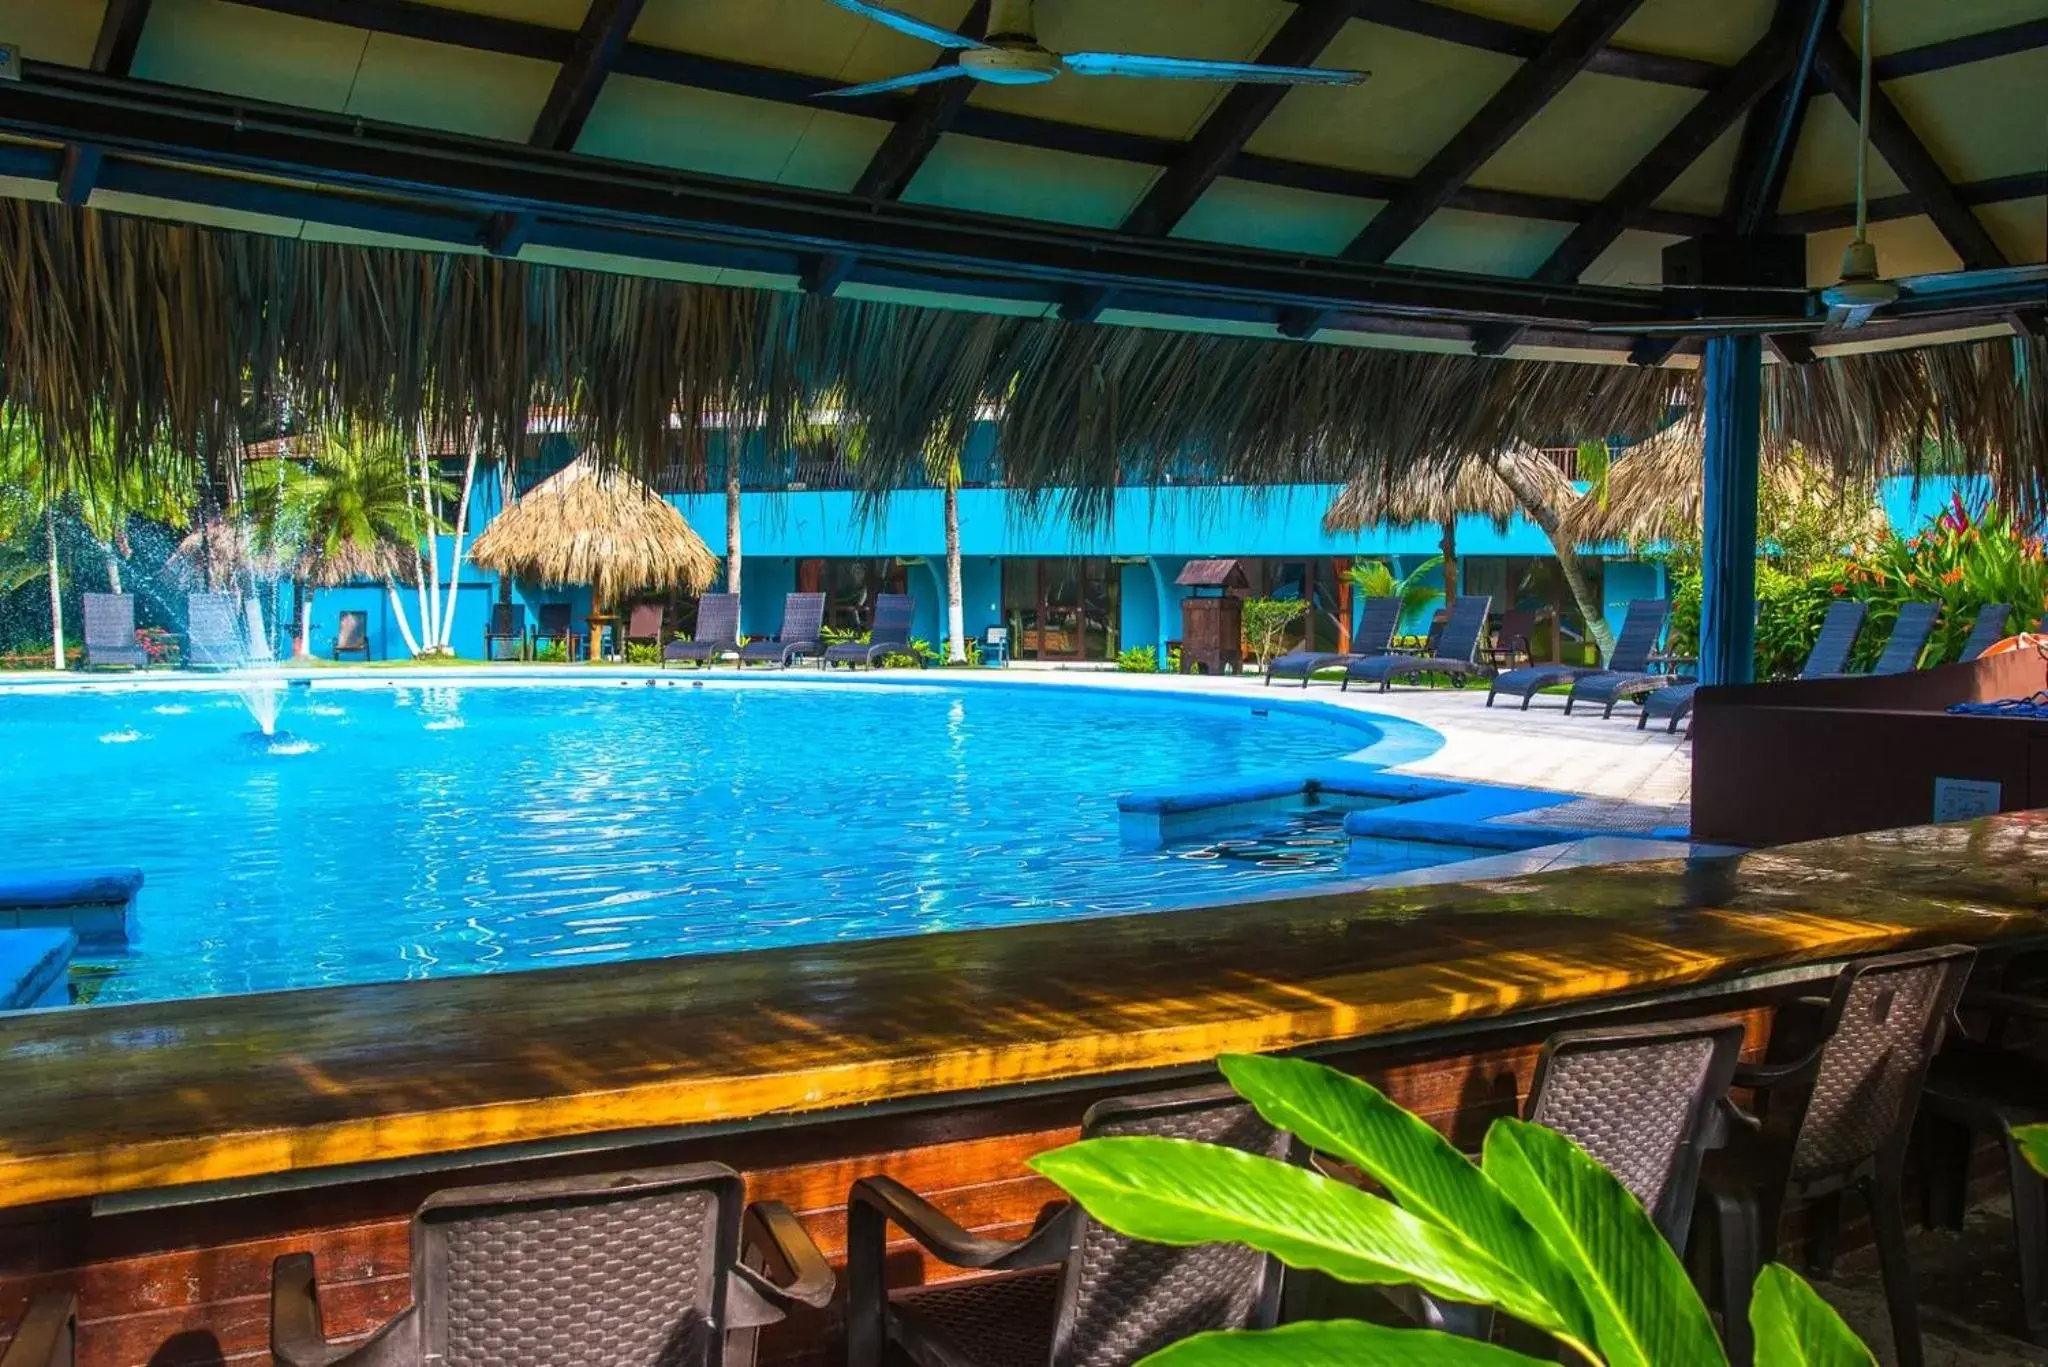 Swimming Pool in Costa Rica Surf Camp by SUPERbrand